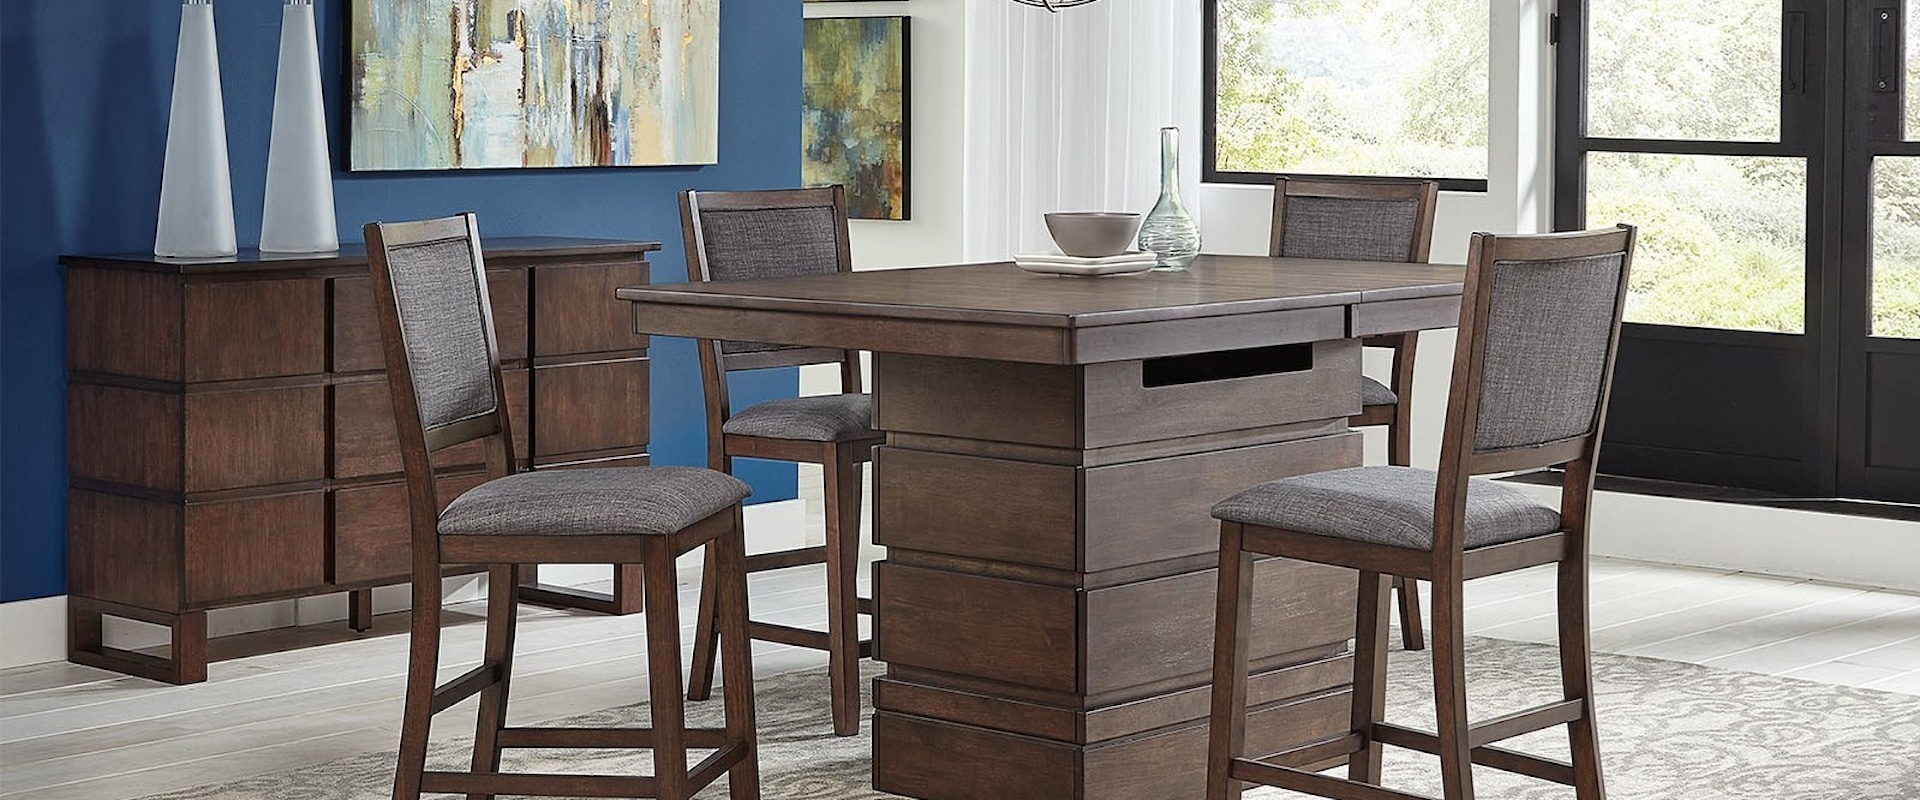 Contemporary Dining Room Group